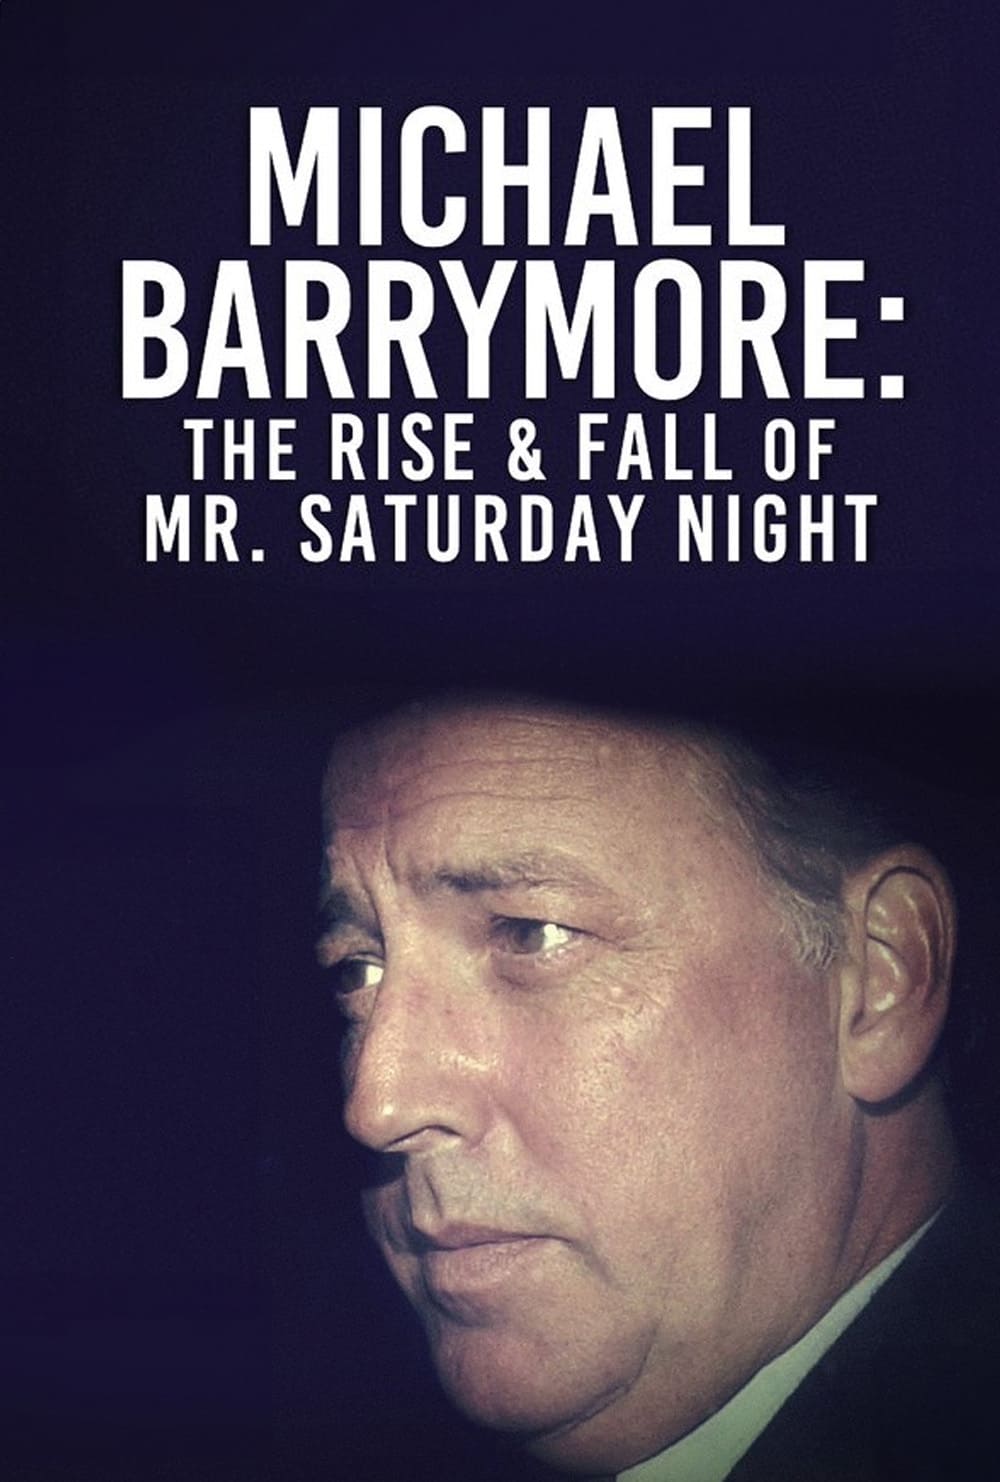 Michael Barrymore: The Rise And Fall Of Mr Saturday Night